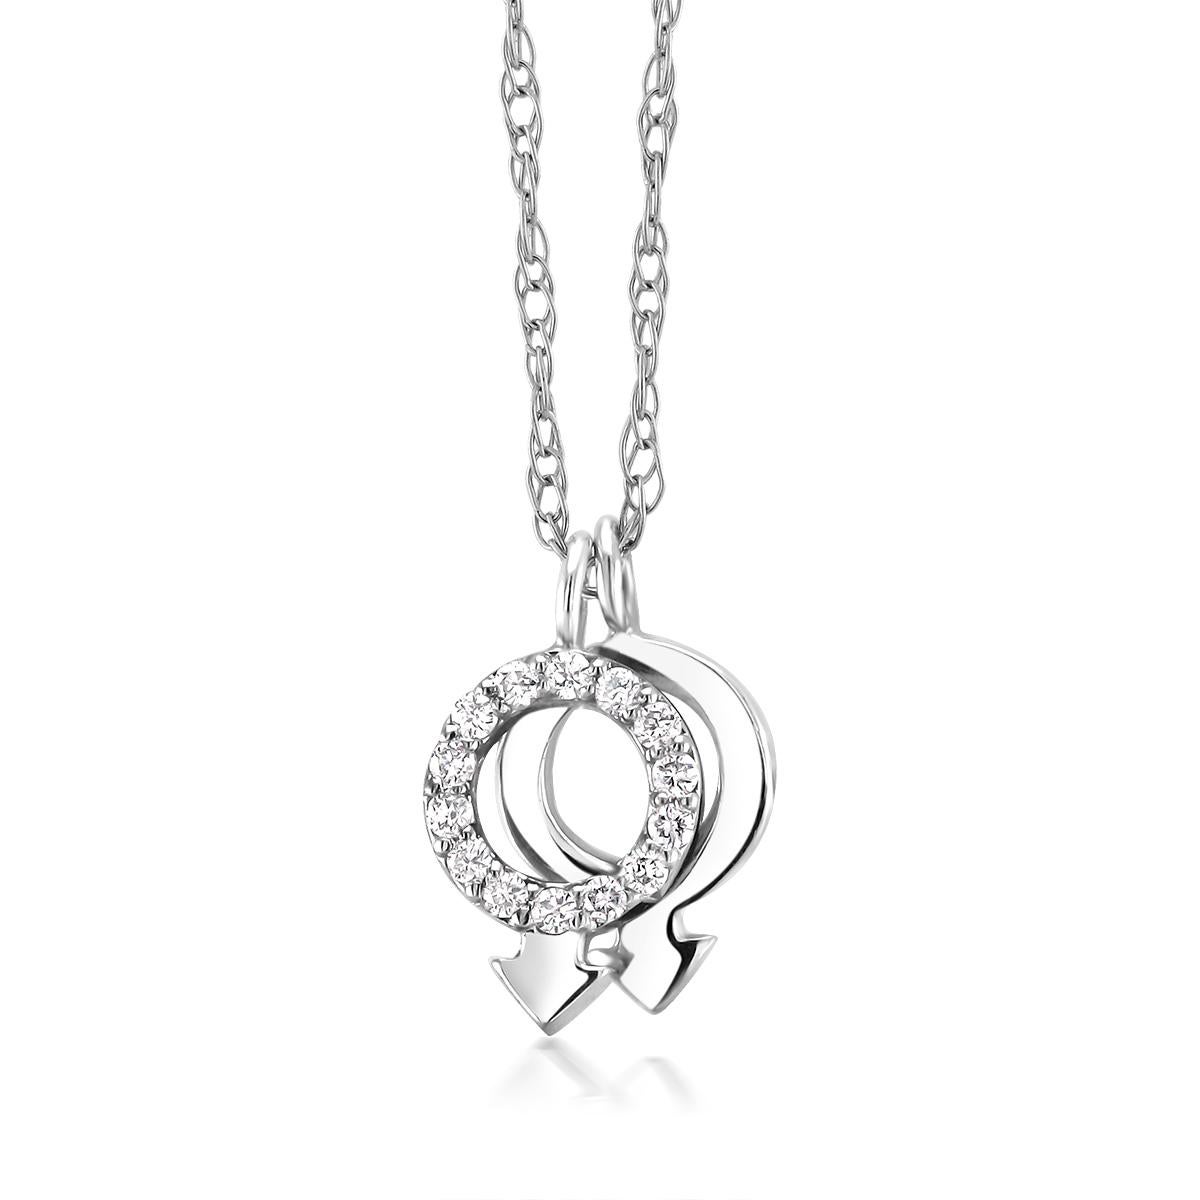 Fourteen karats white gold necklace pendant with two  Pride charms  
Chain 18